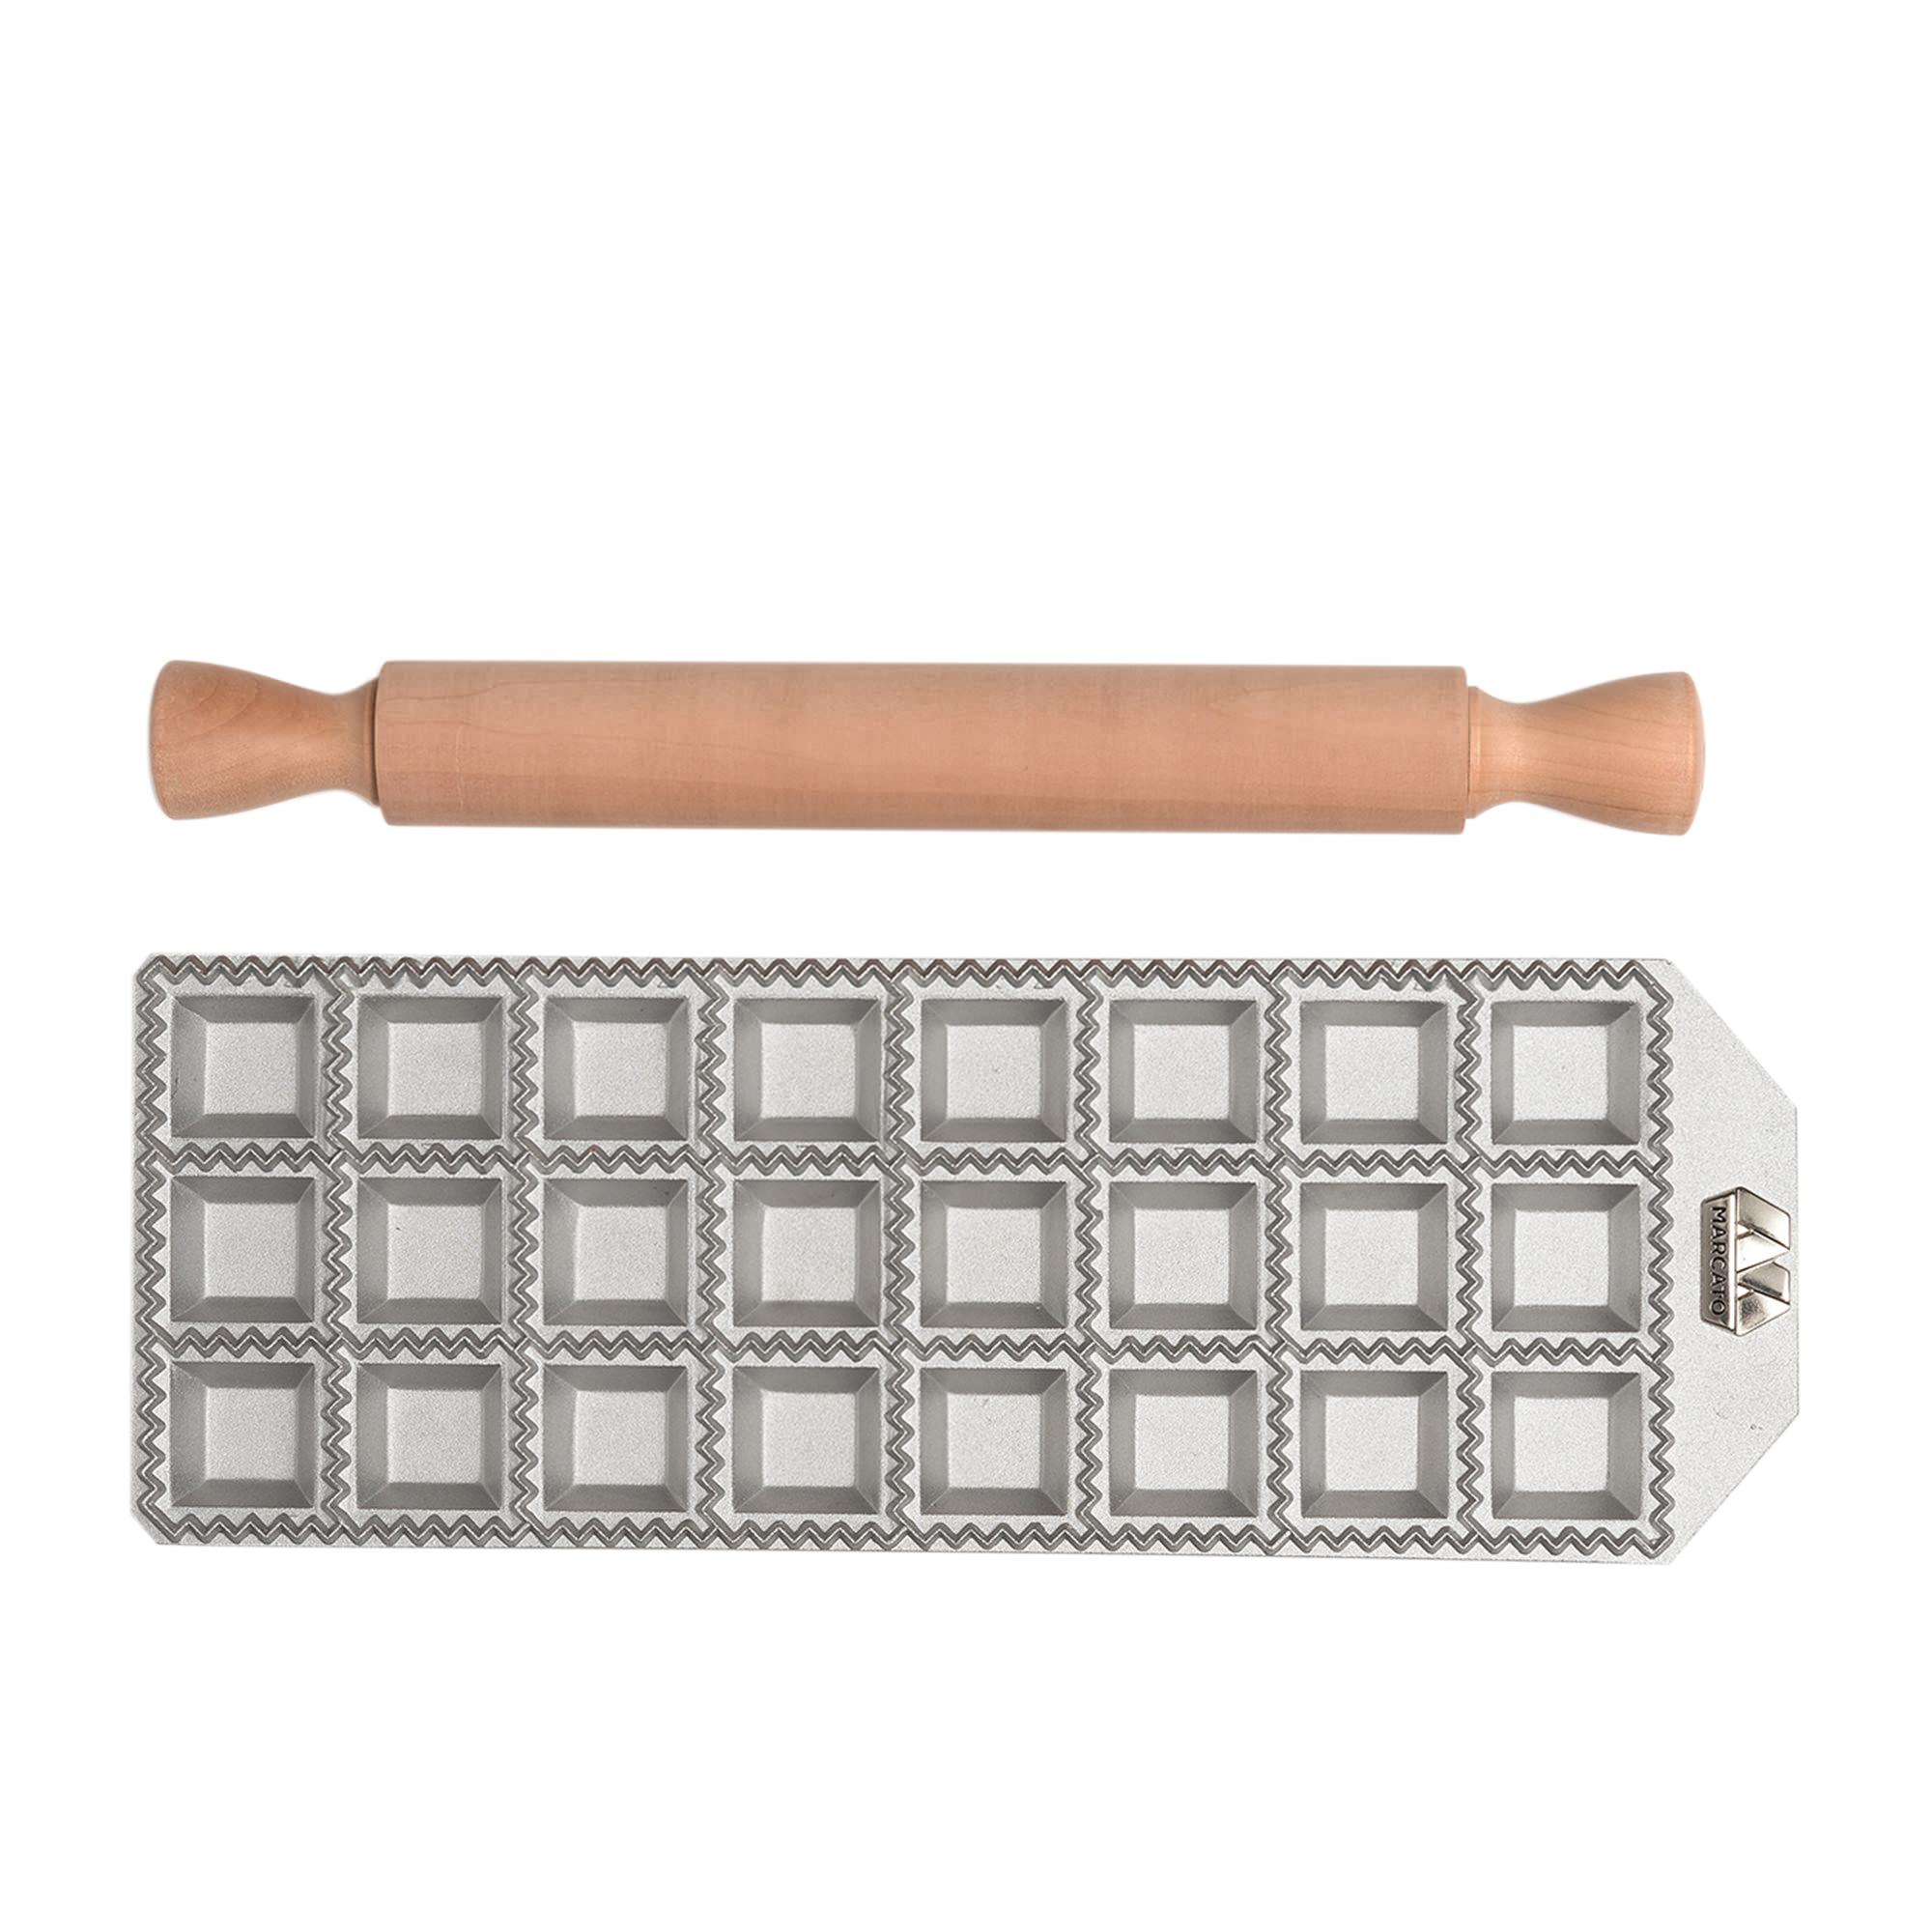 Marcato Raviolo Tray 24 Hole Square with Rolling Pin Image 5